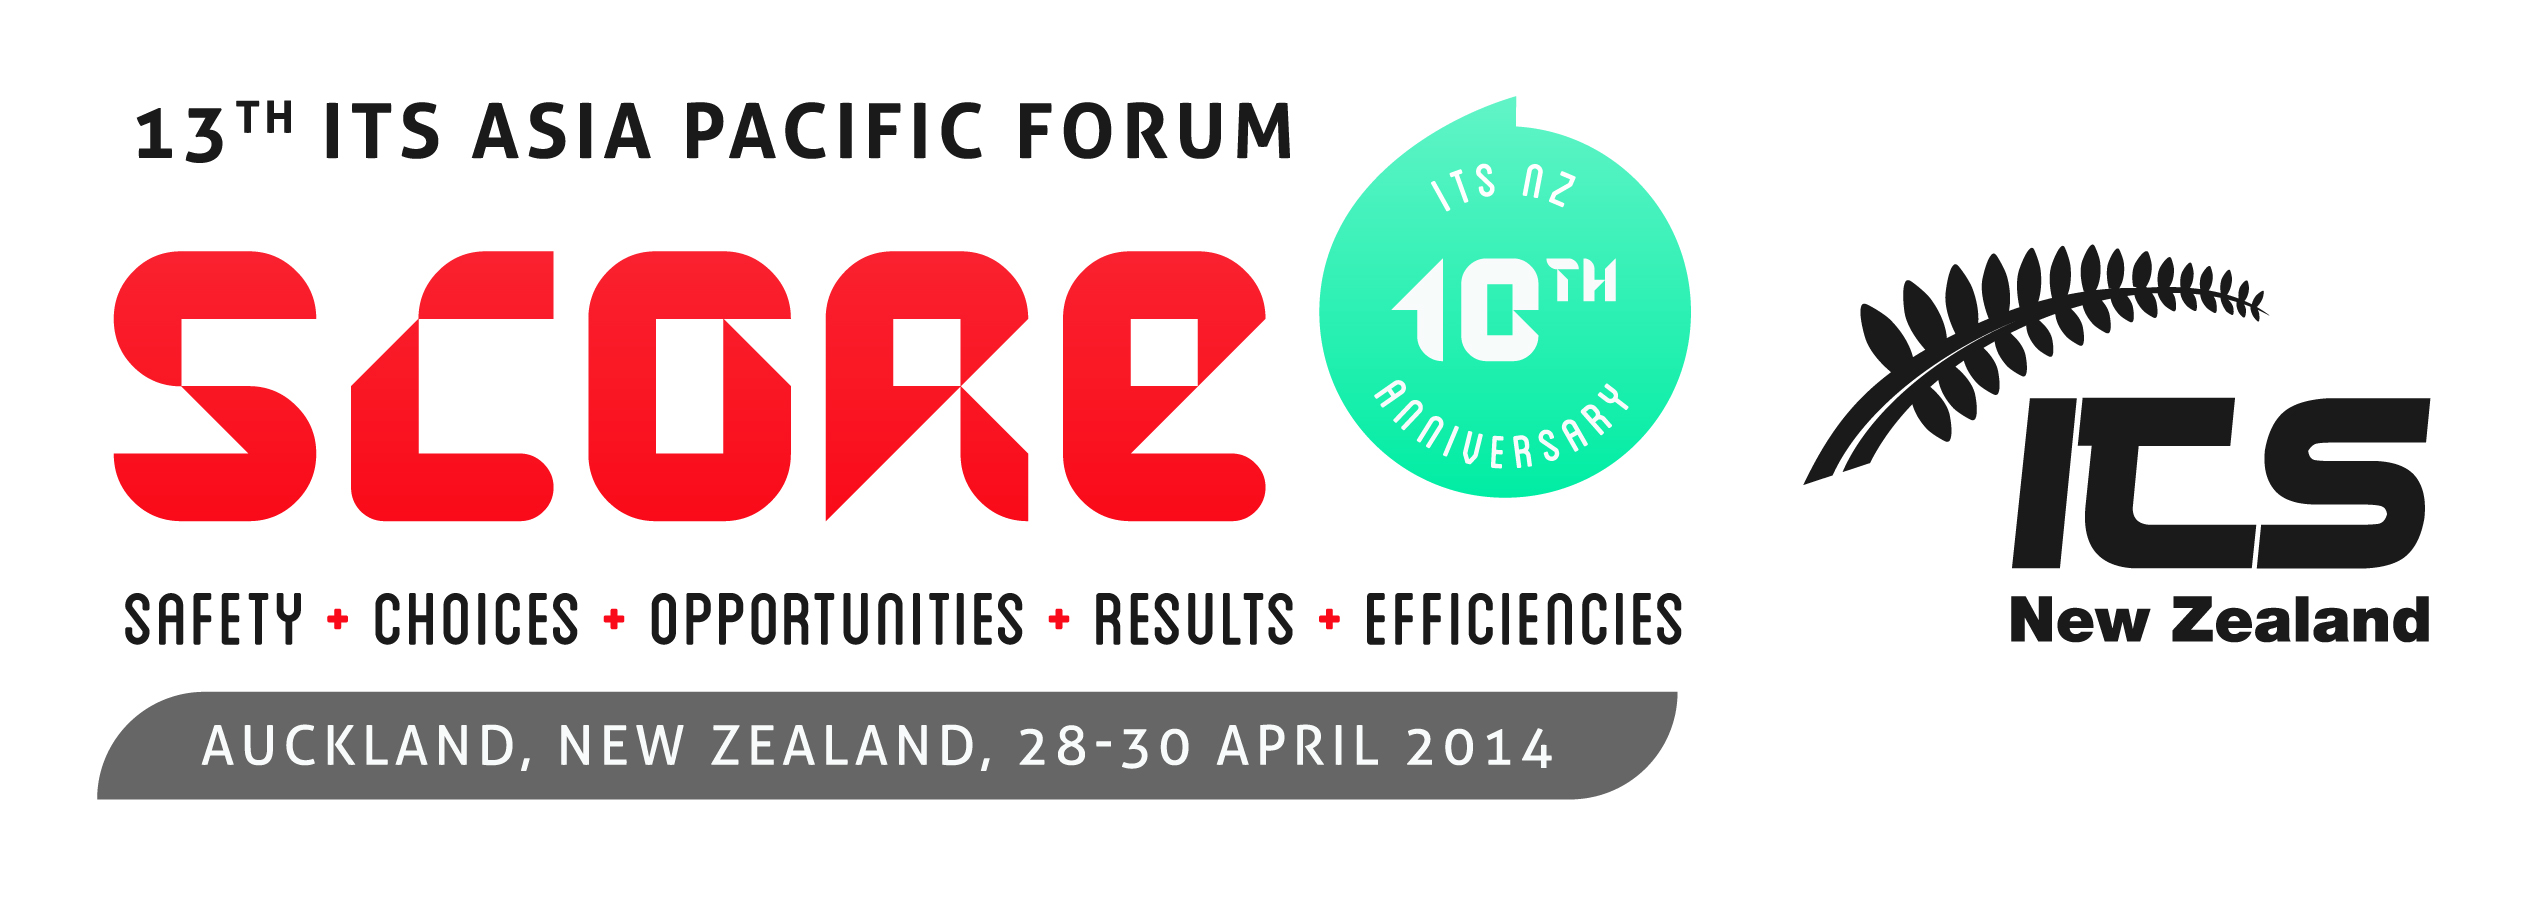 ITS Asia Pacific Forum -hres